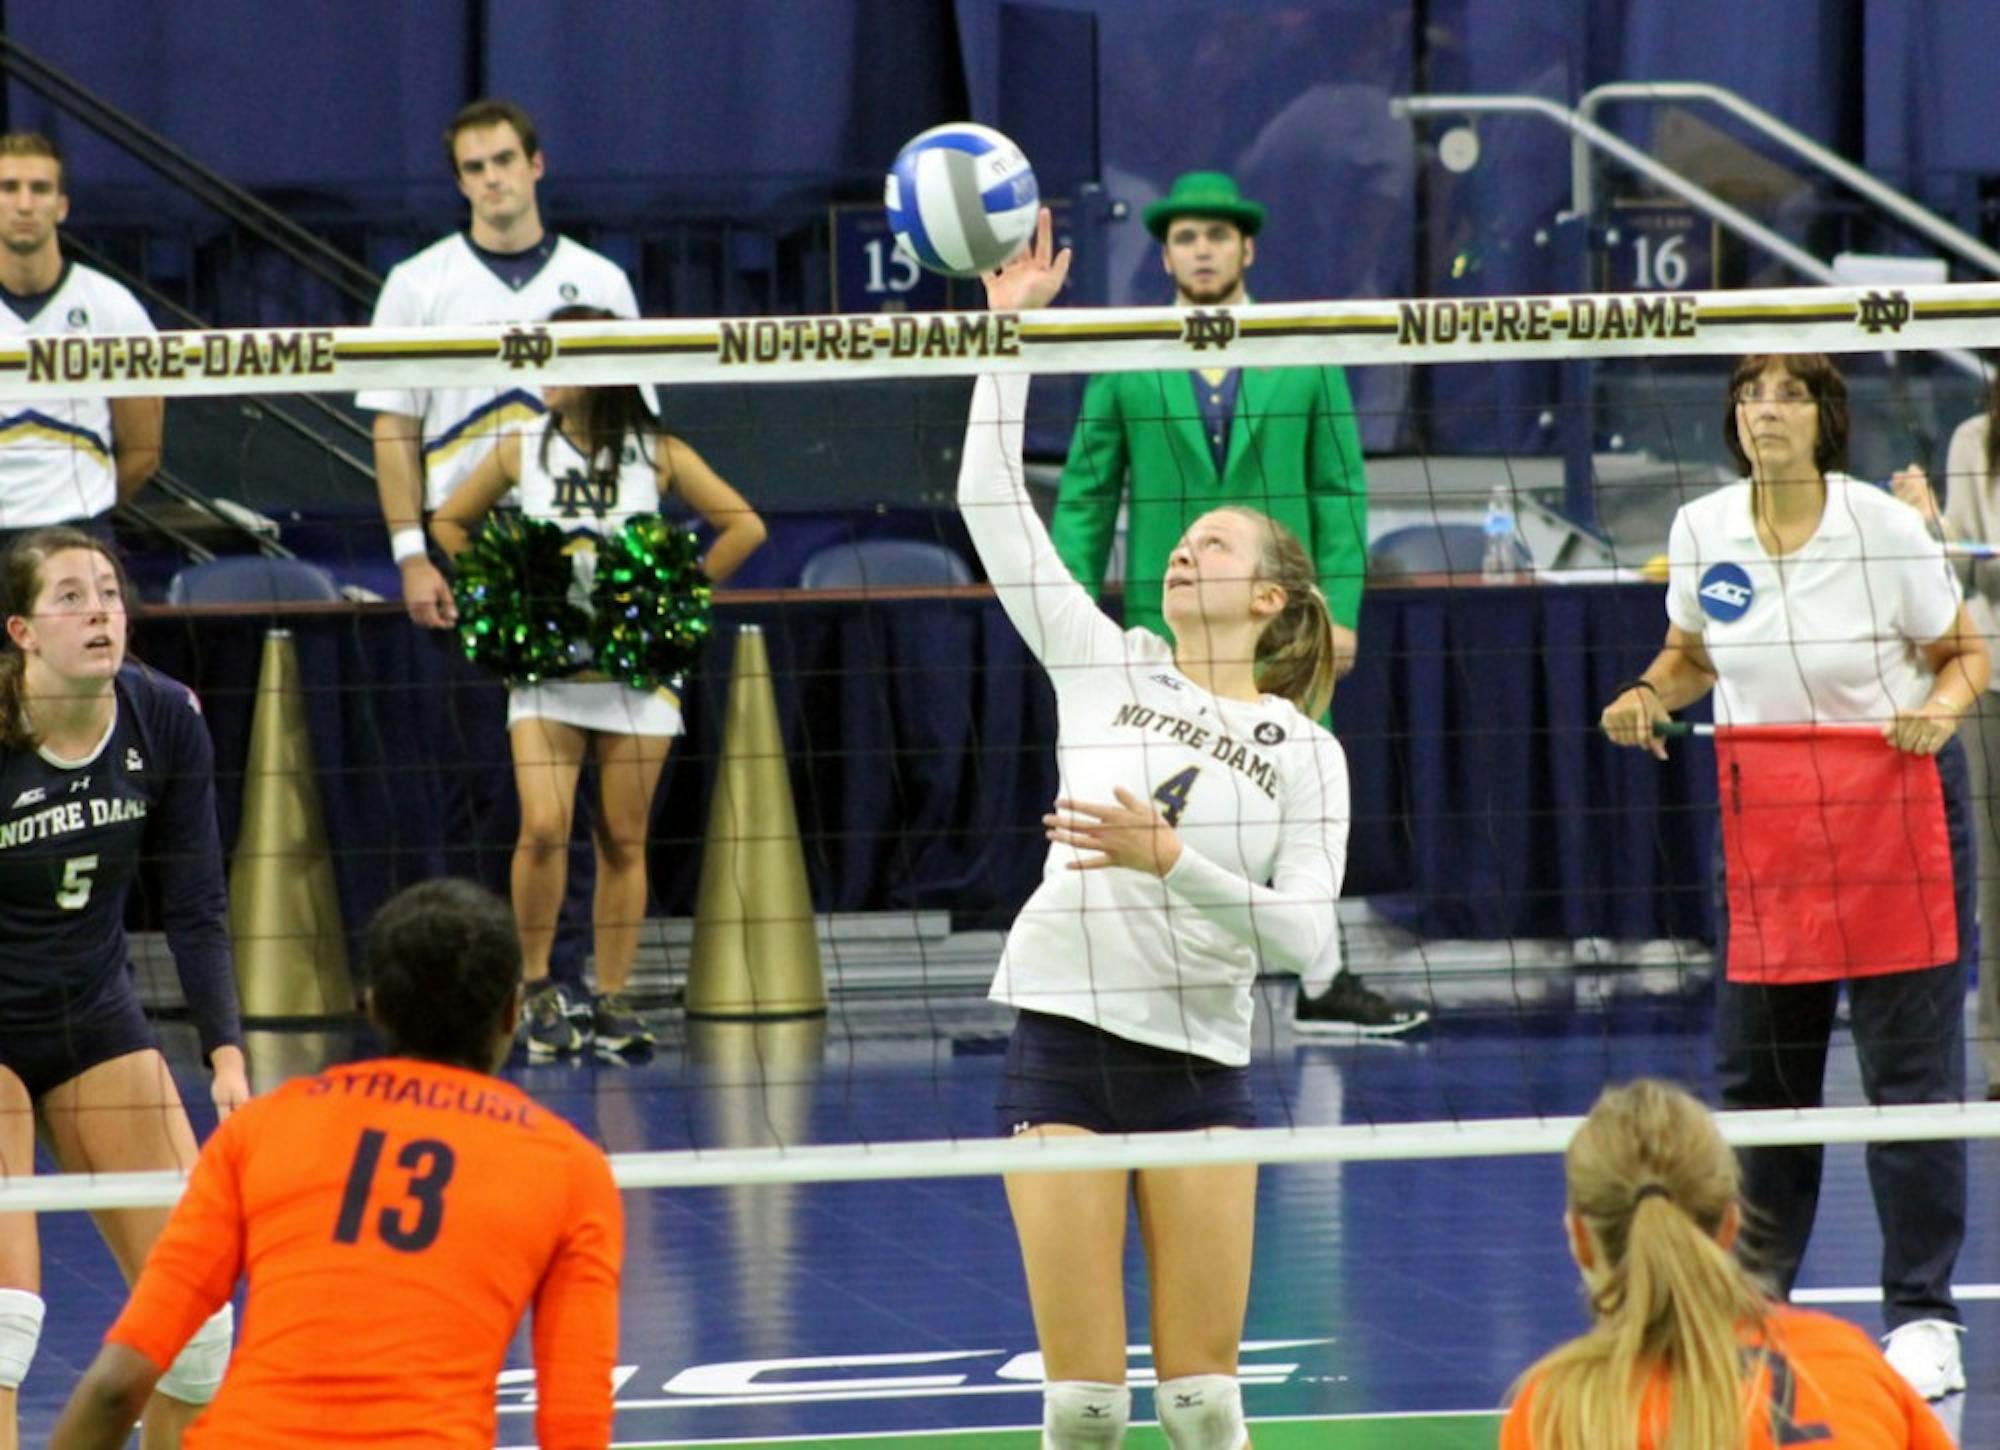 Irish freshman libero Ryann DeJarld tips the ball back over the net in Notre Dame’s 3-2 loss to Syracuse at Purcell Pavilion.